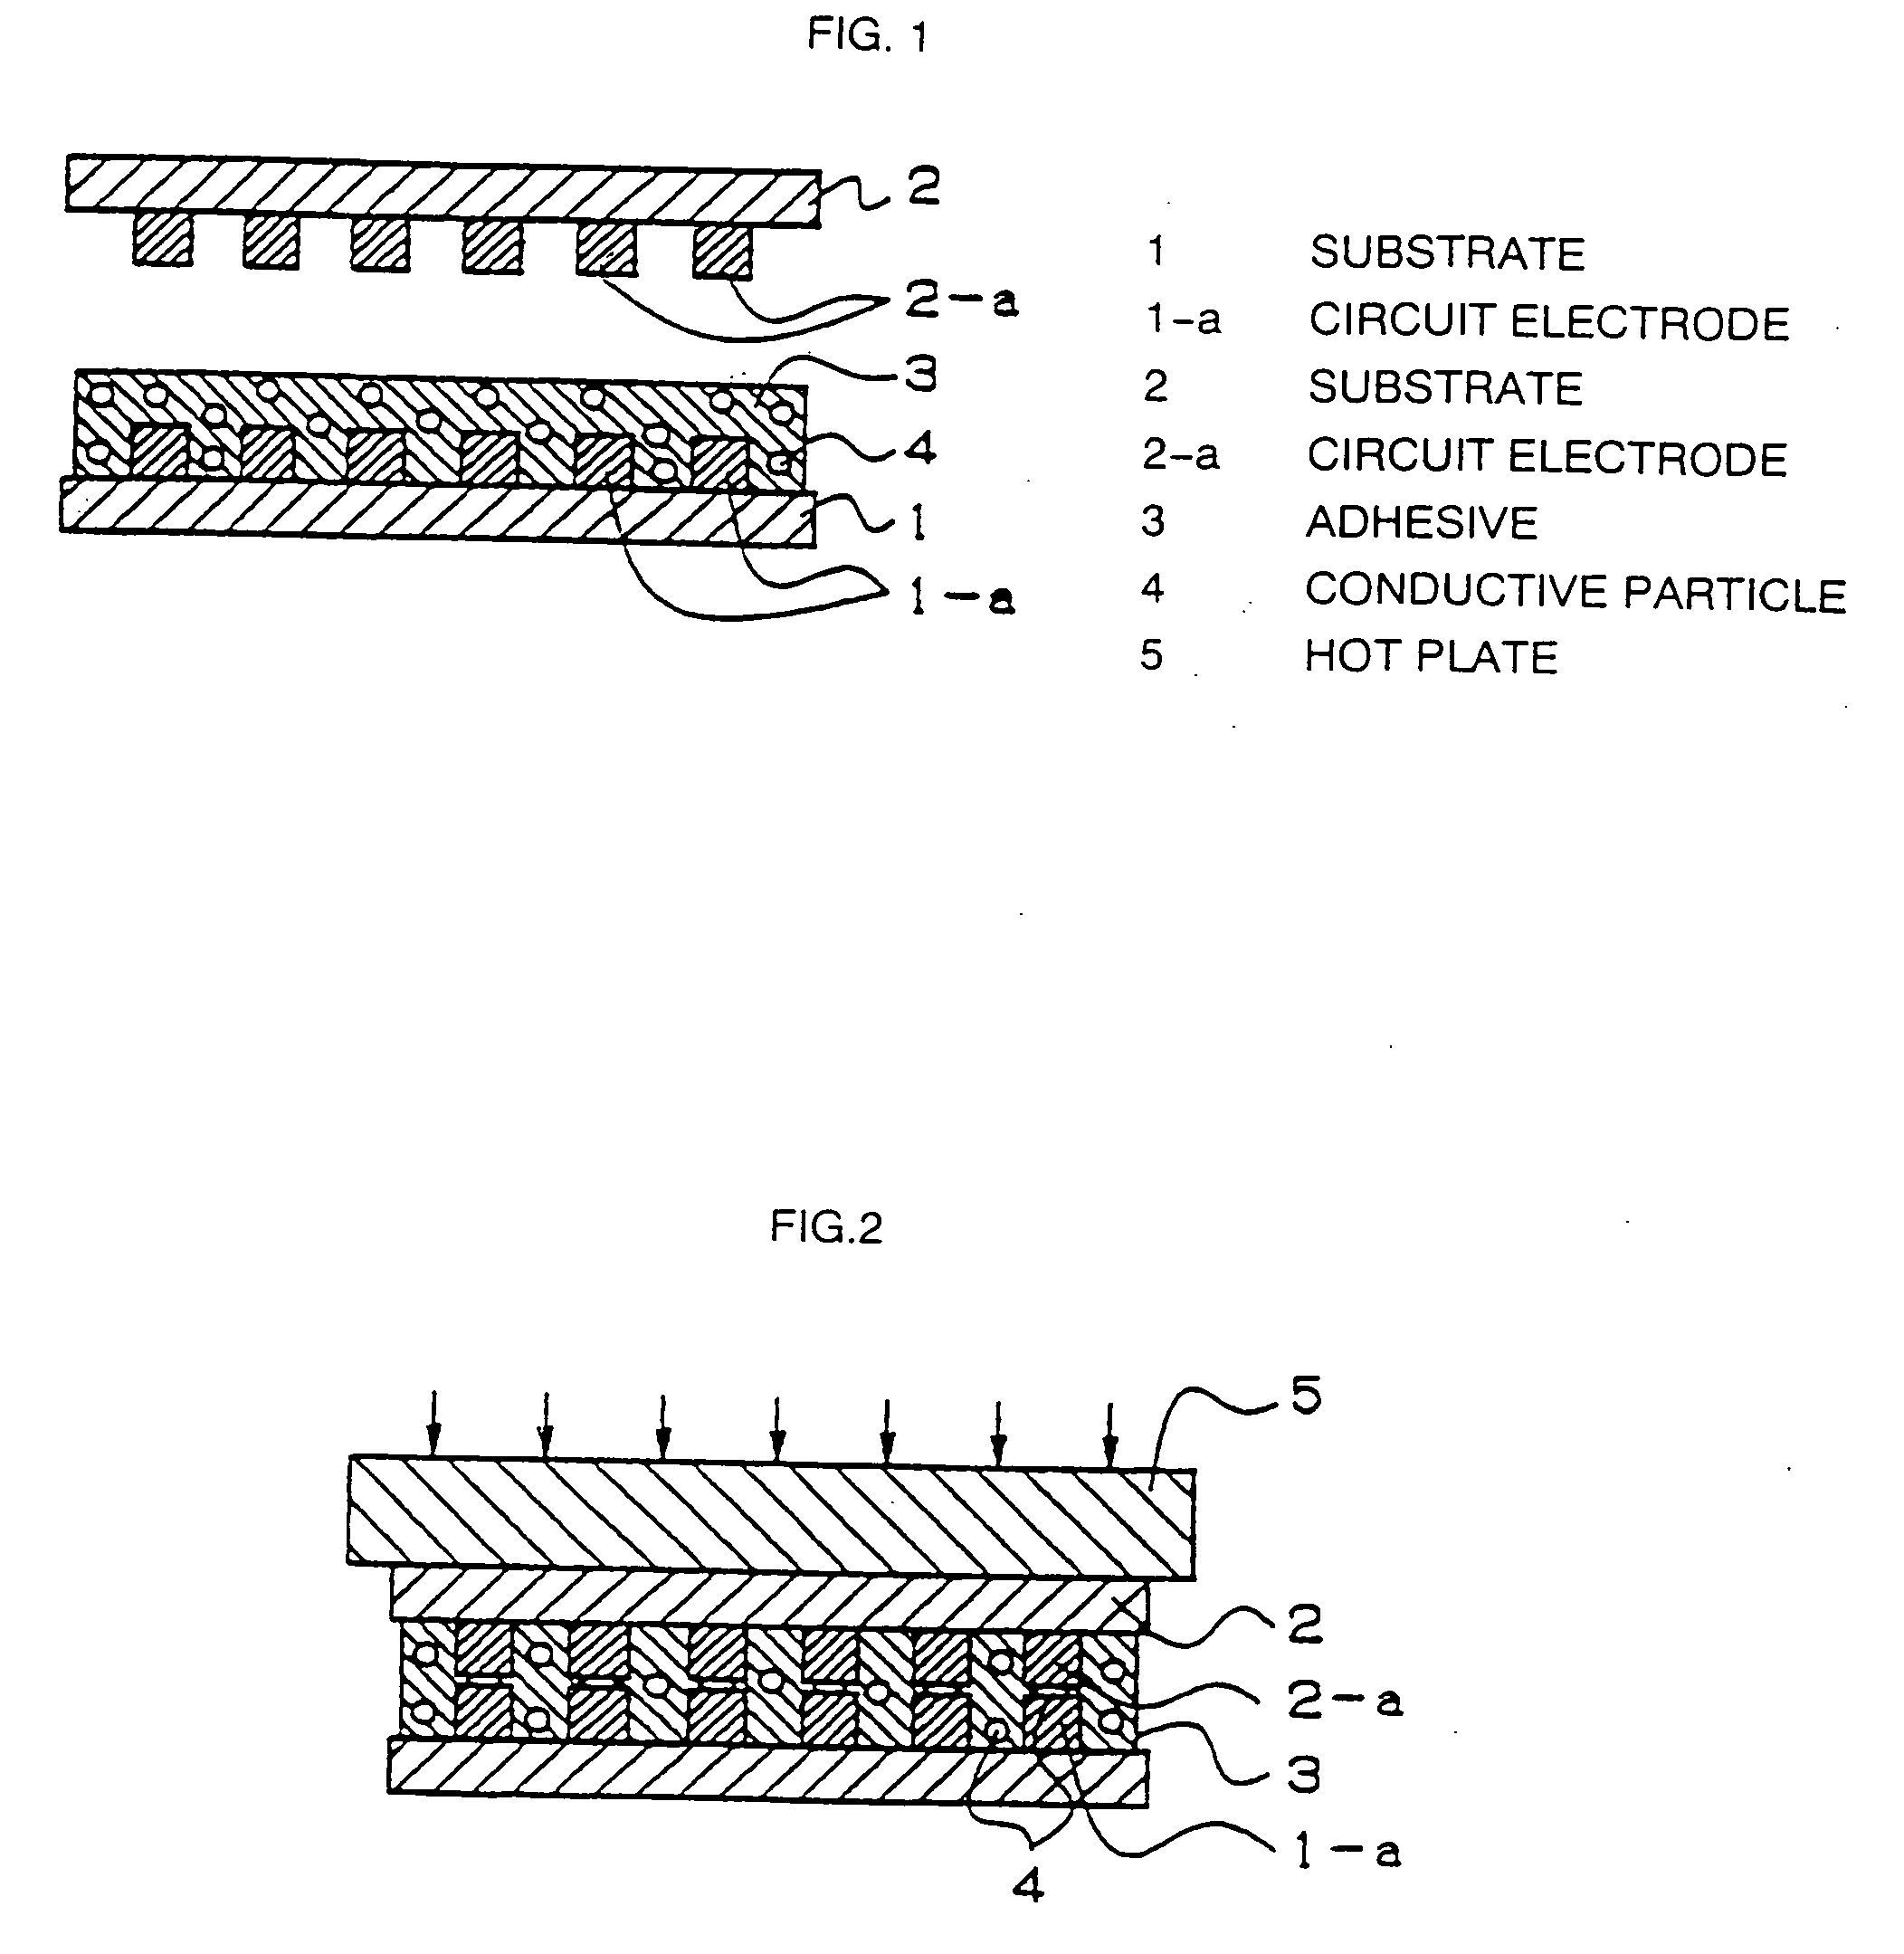 Electronic circuit including circuit-connecting material